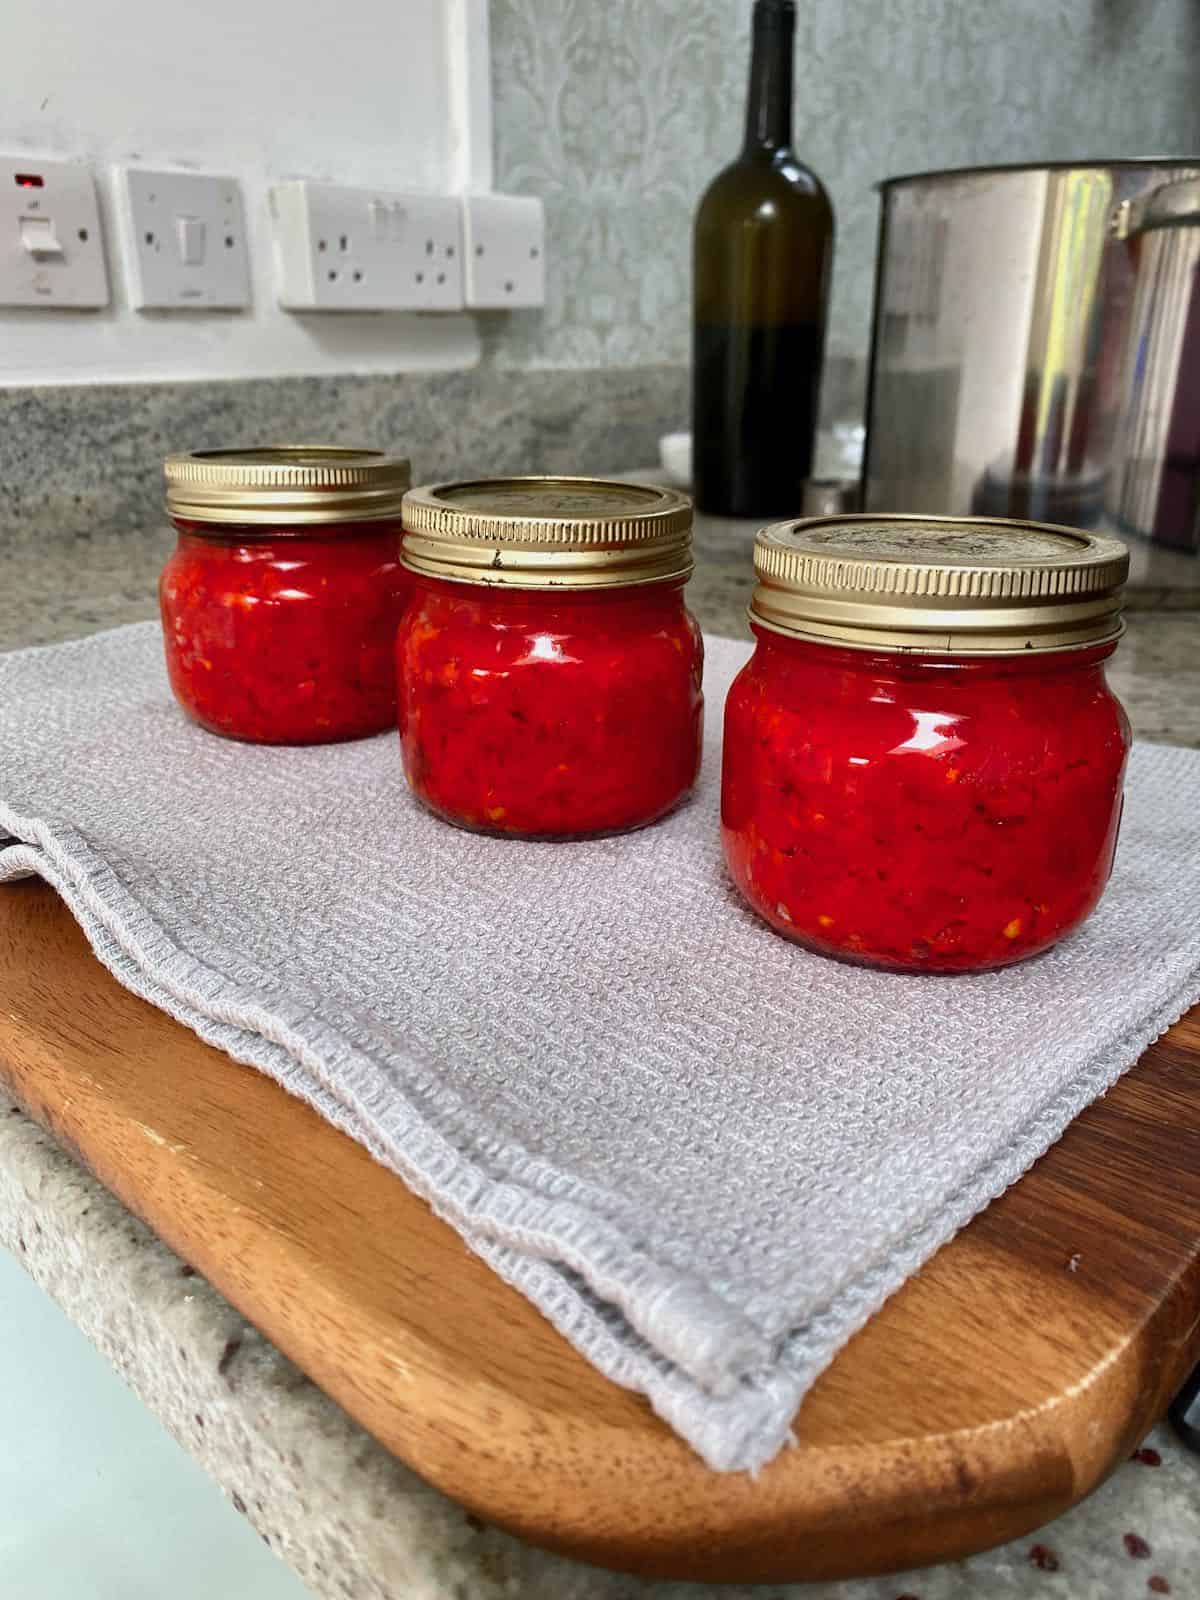 Three jars with home-canned red pepper paste